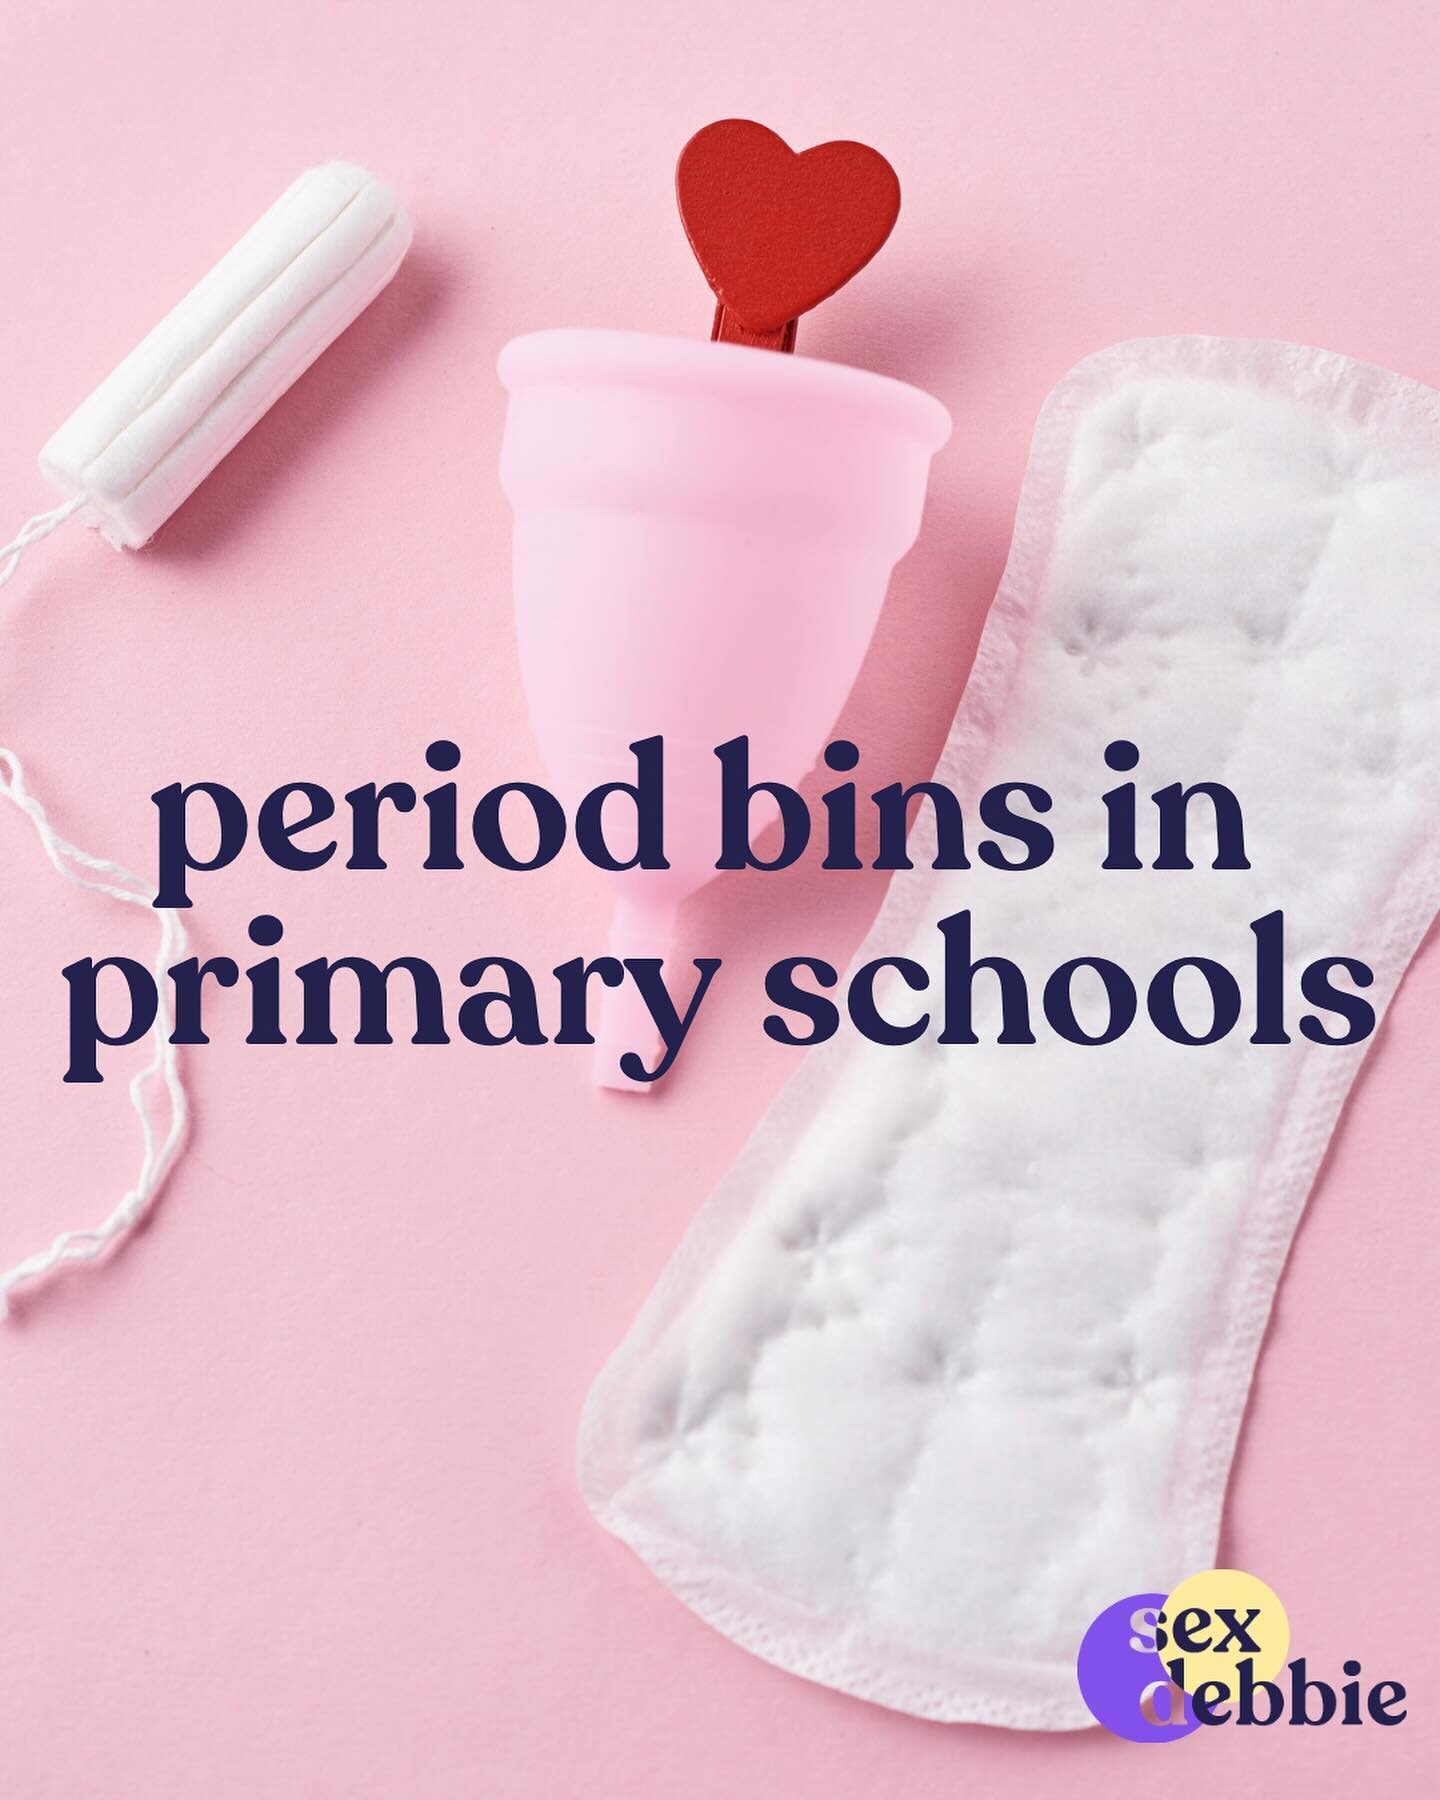 Help me get period bins in all schools.
Download my letter from my website here and send it to your primary school today.

www.sexdebbie.com